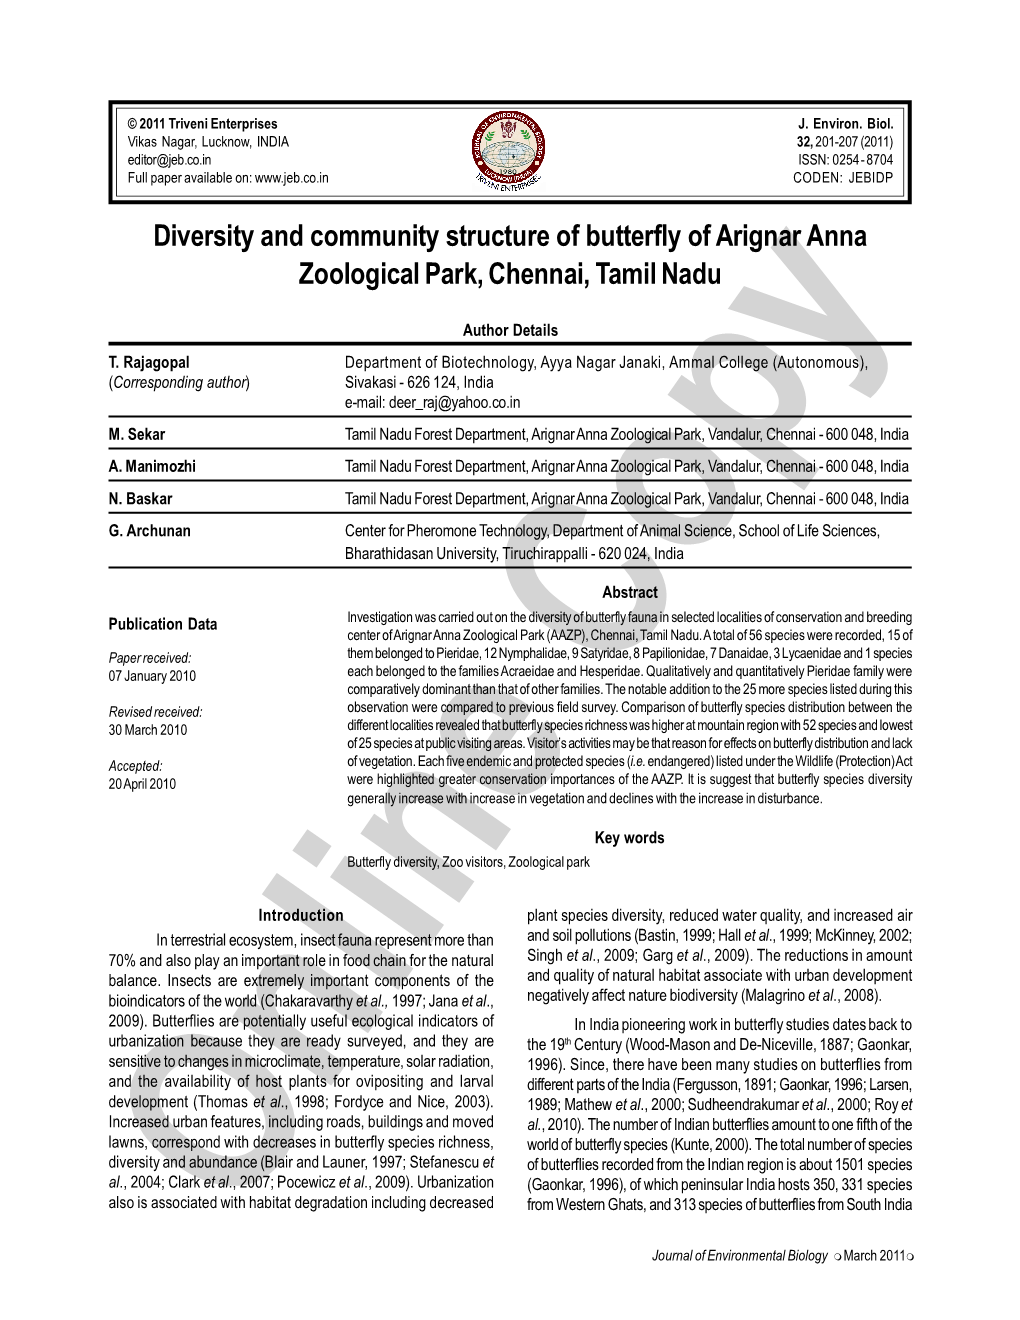 Diversity and Community Structure of Butterfly of Arignar Anna Zoological Park, Chennai, Tamil Nadu